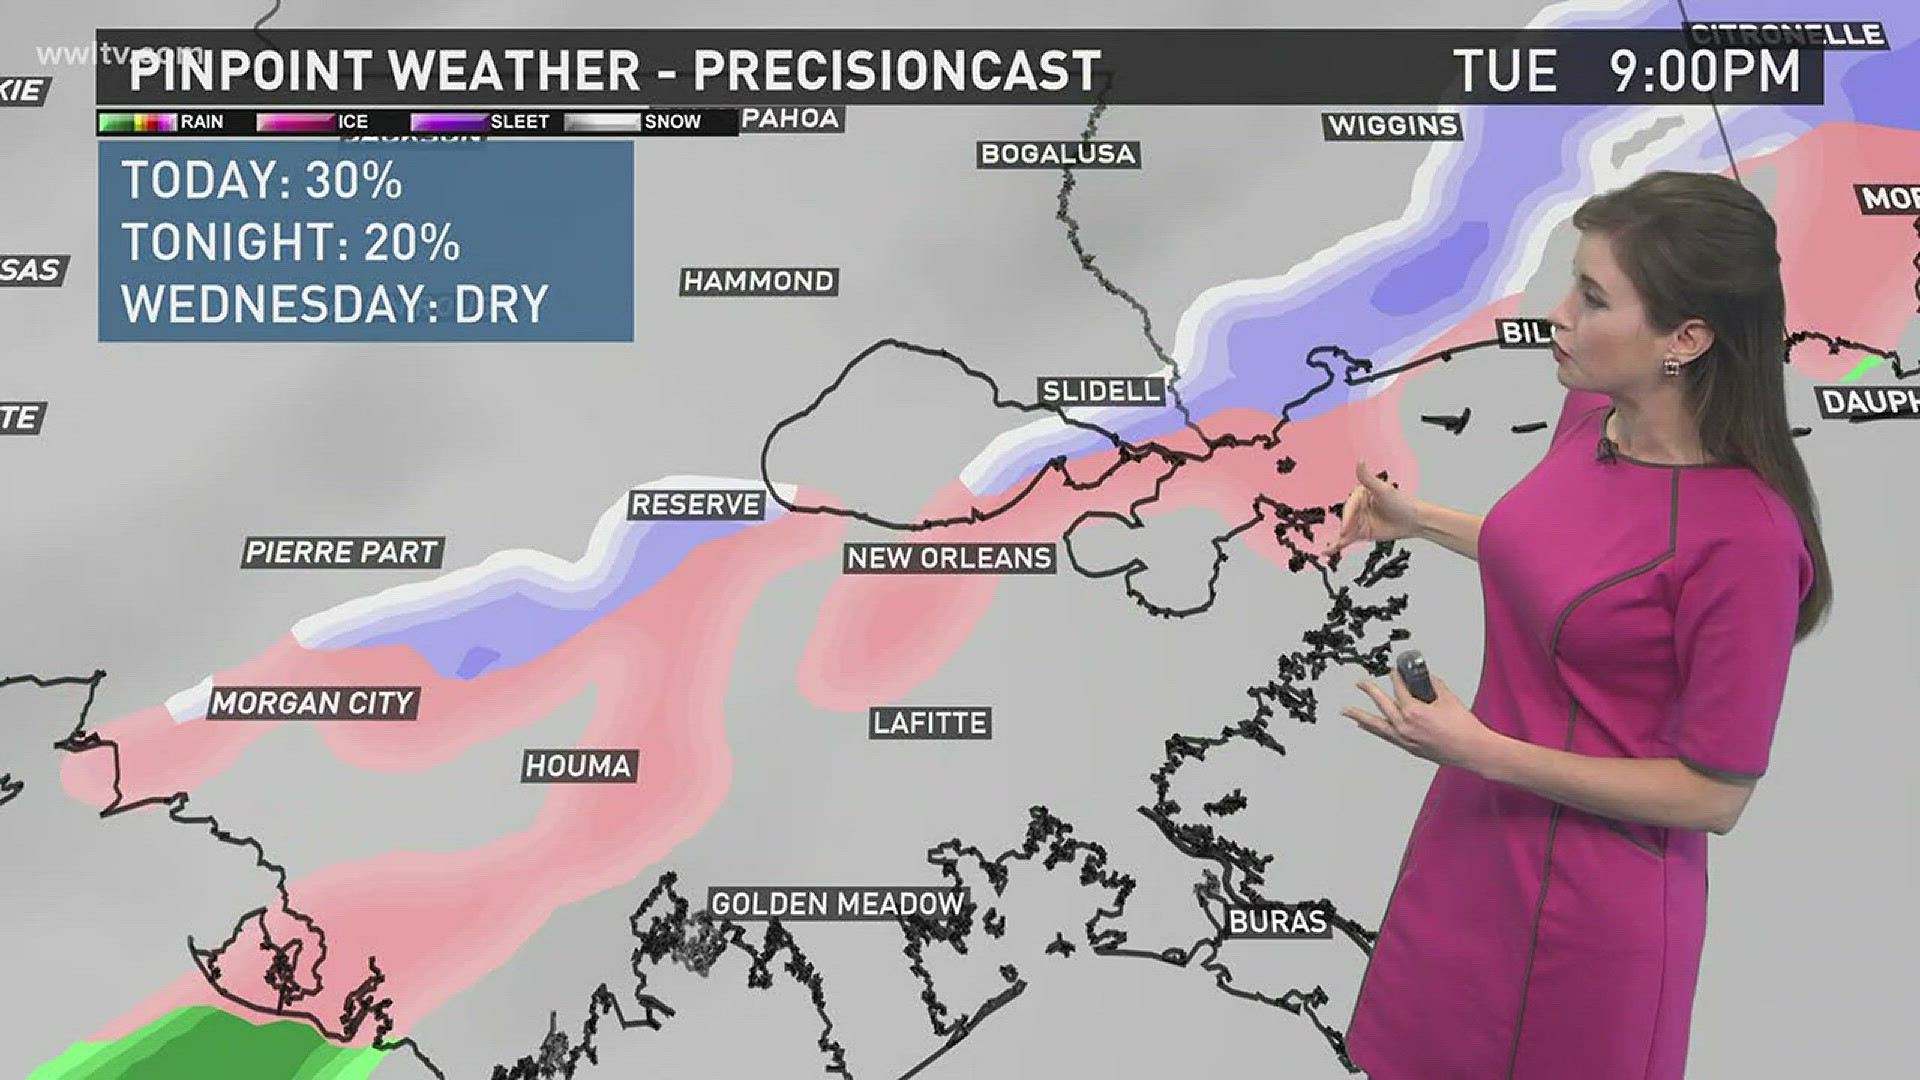 Meteorologist Alexandra Cranford has the forecast at noon on Tuesday, January 16, 2018.